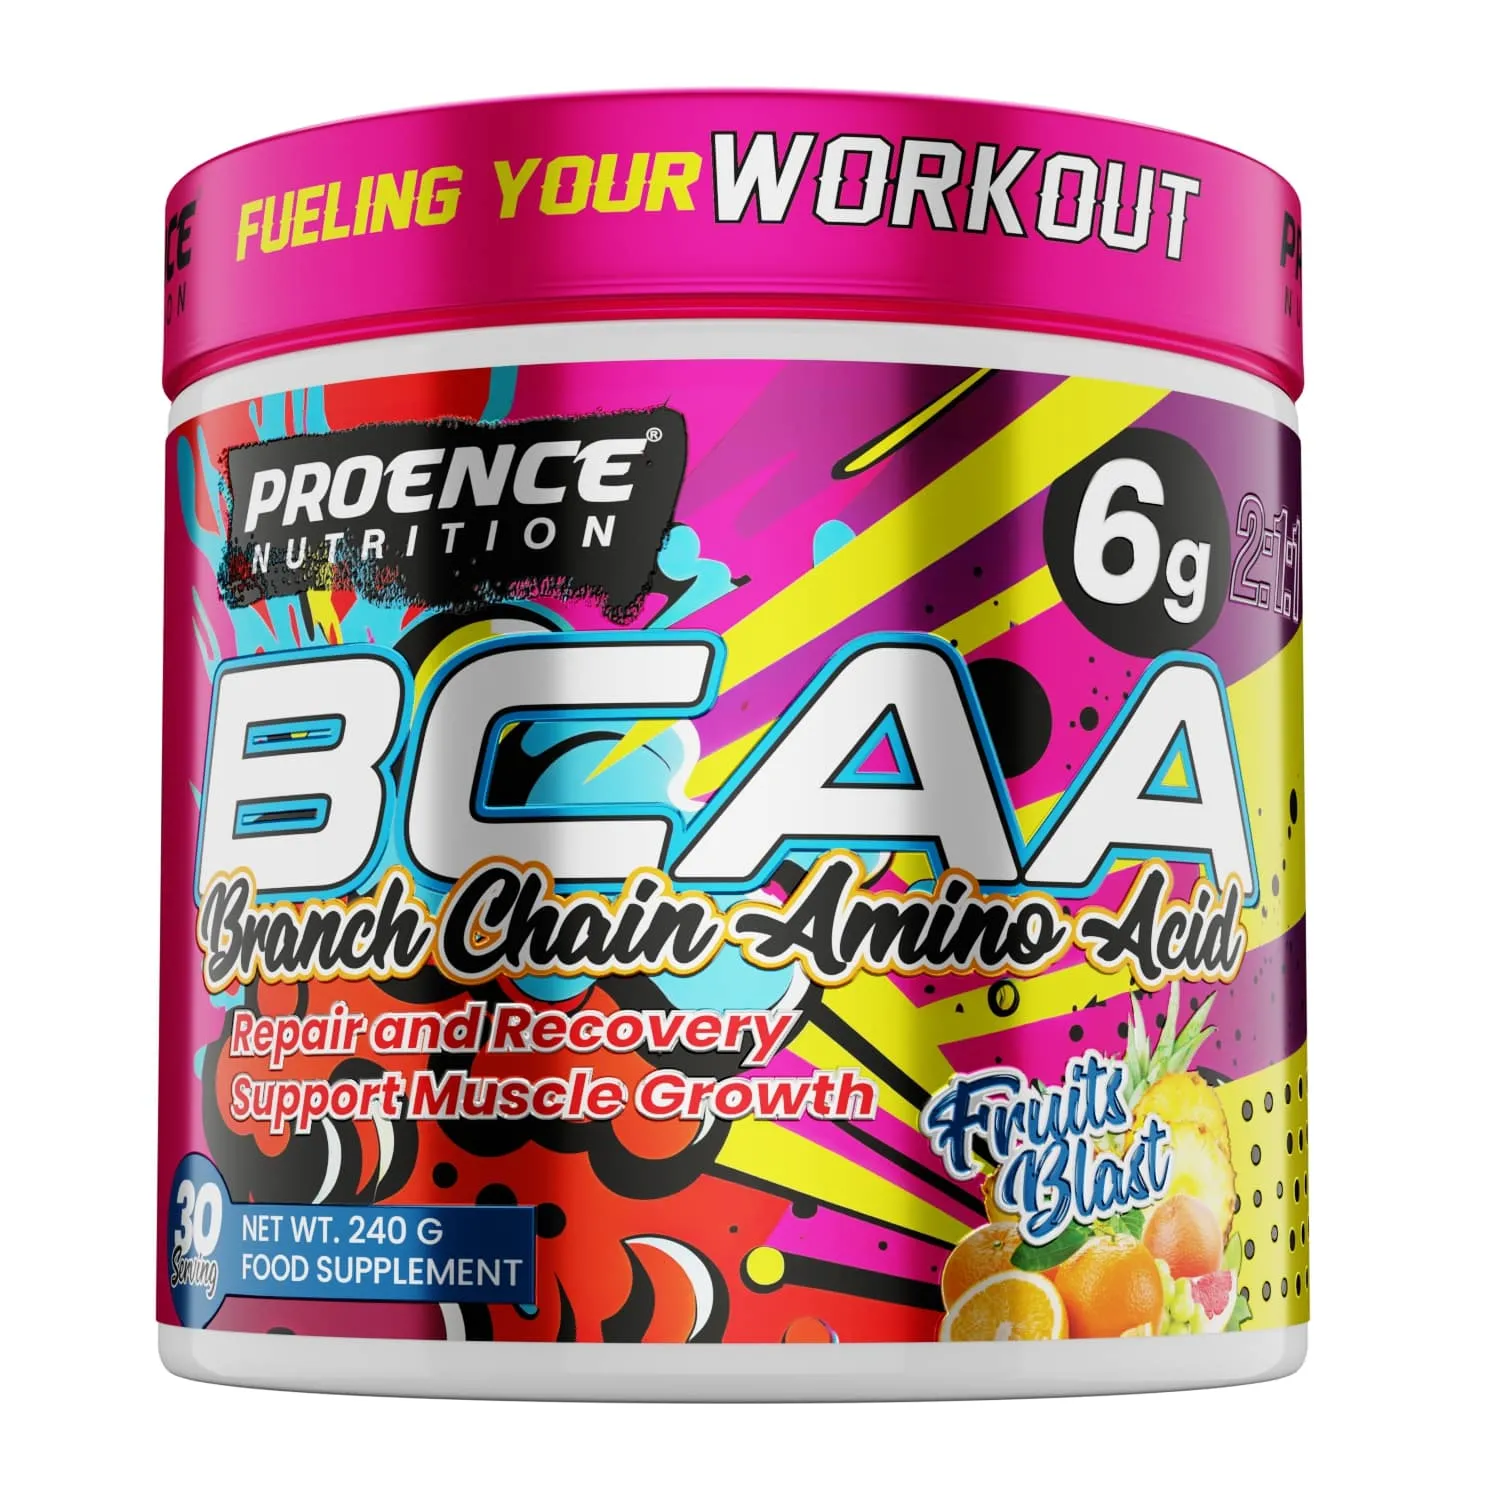 Proence BCAA 2:1:1, 240 gms | Intra-Workout BCAA with 6g of BCAAs to Build Muscle and Aid Recovery during Workouts